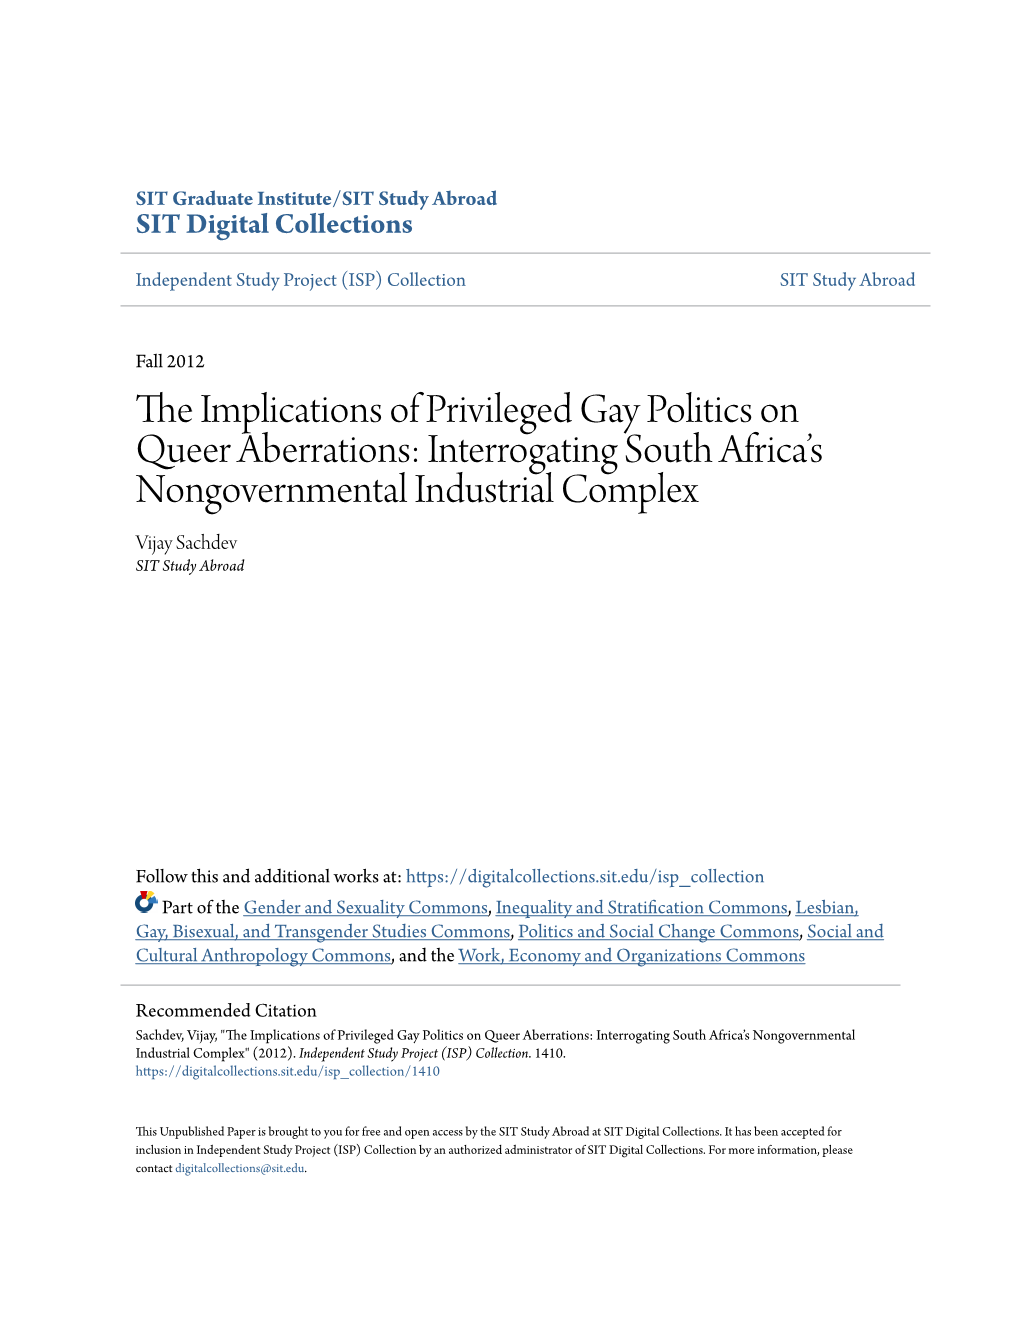 The Implications of Privileged Gay Politics on Queer Aberrations: Interrogating South Africa’S Nongovernmental Industrial Complex